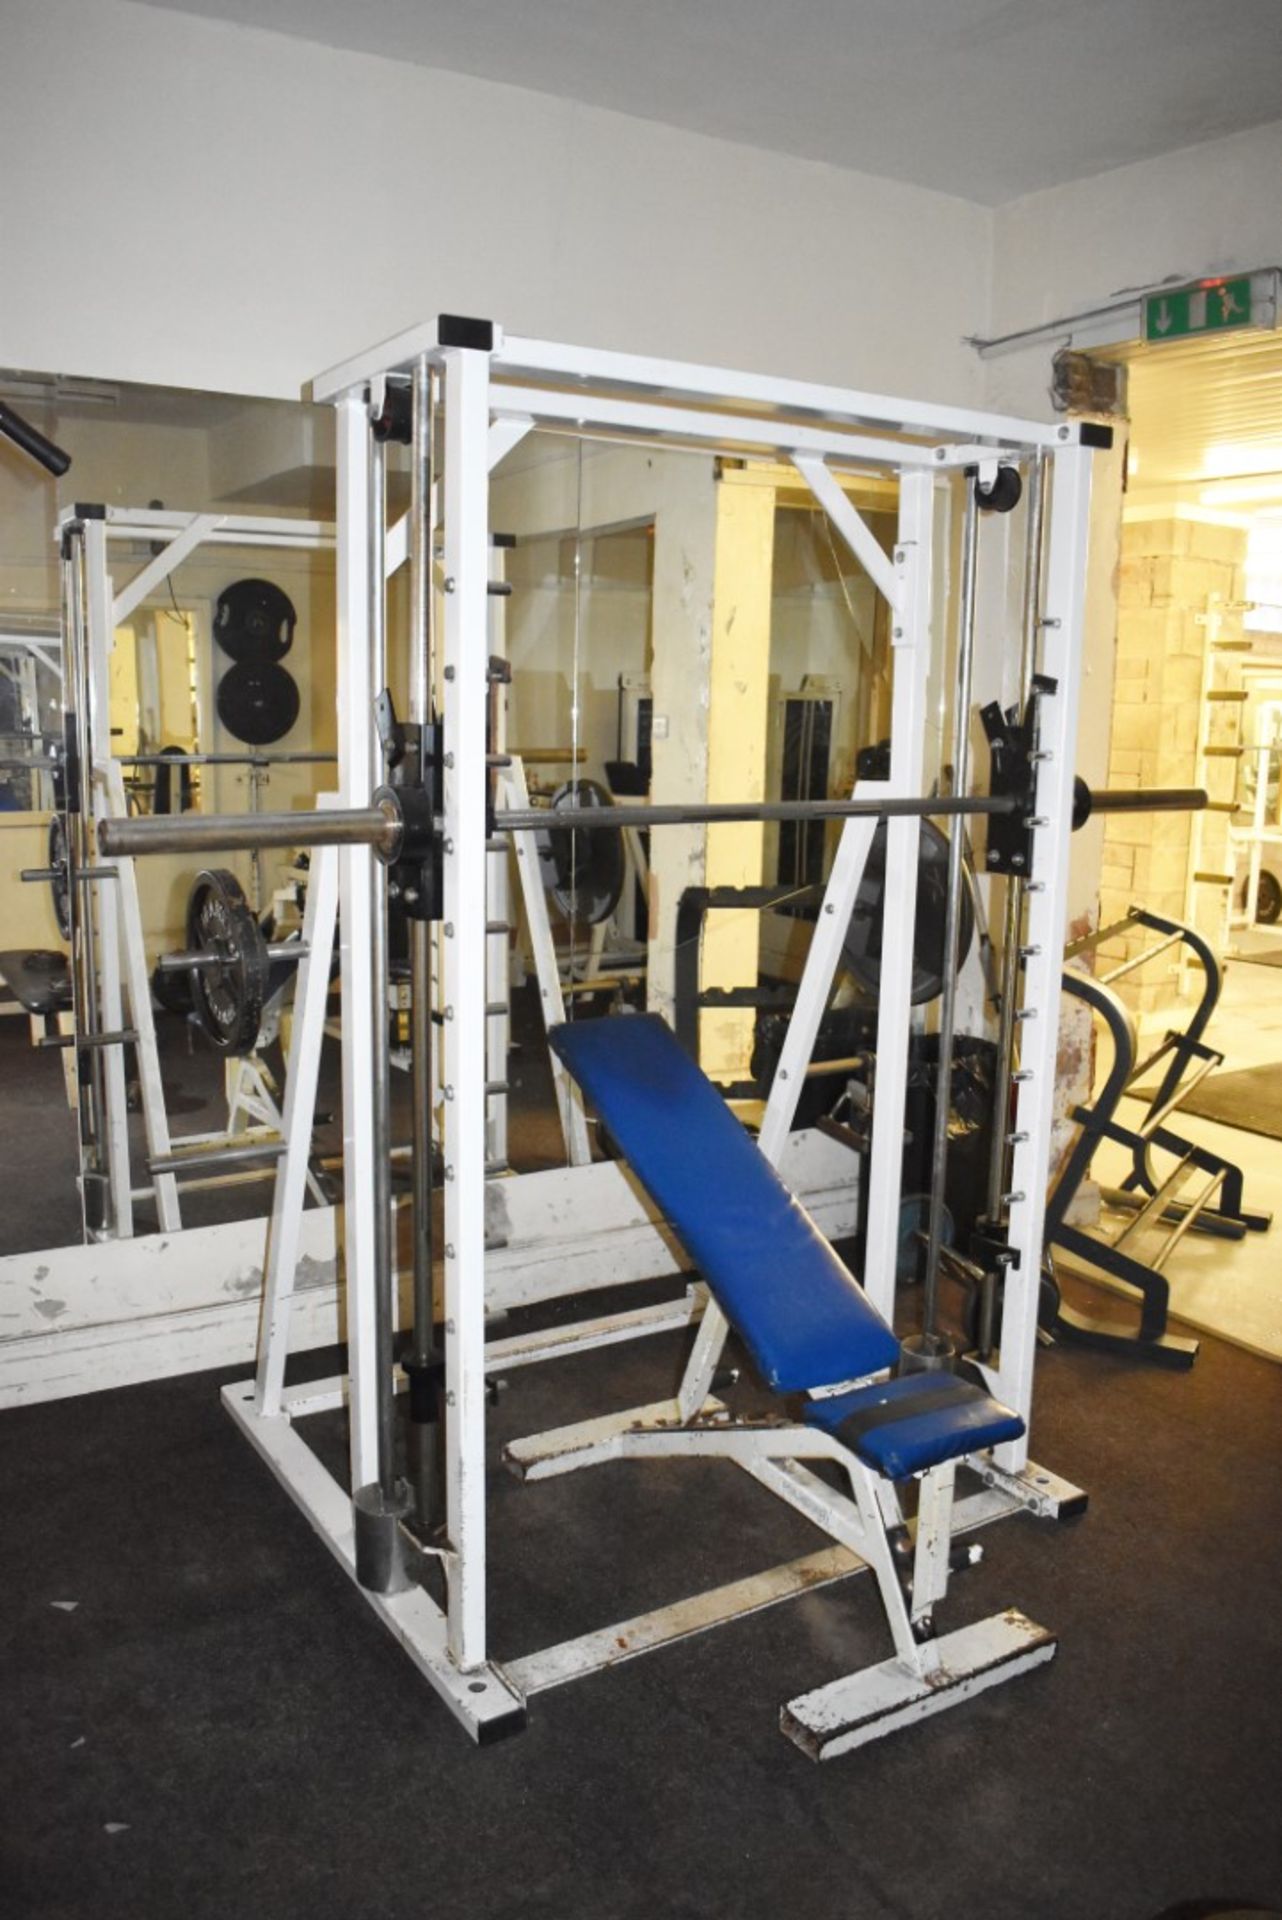 Contents of Bodybuilding and Strongman Gym - Includes Approx 30 Pieces of Gym Equipment, Floor Mats, - Image 26 of 95